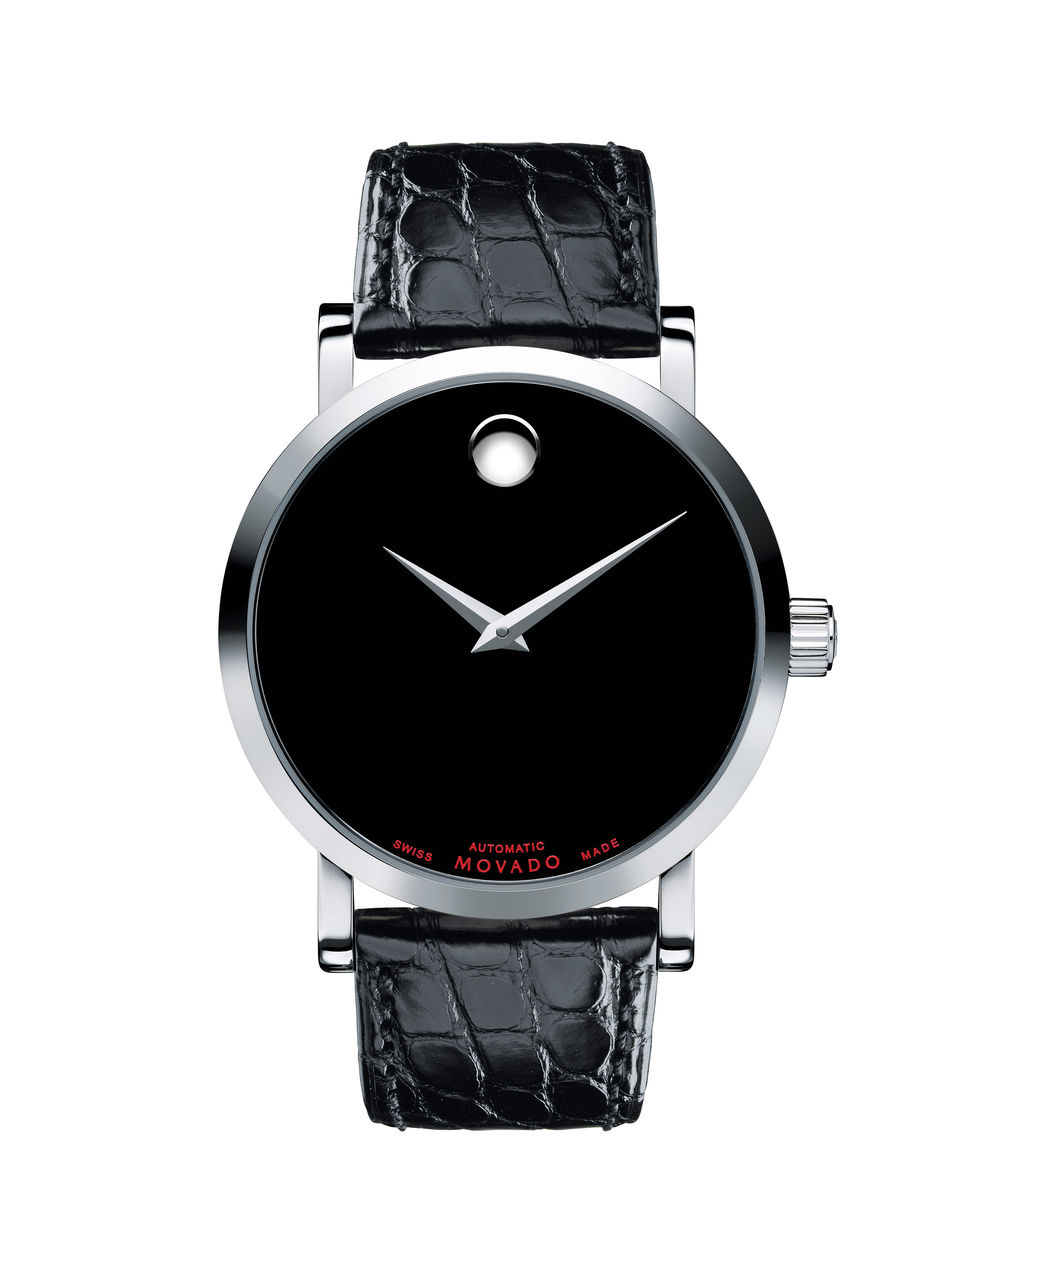 0606112 Movado Men's Red Label automatic watch